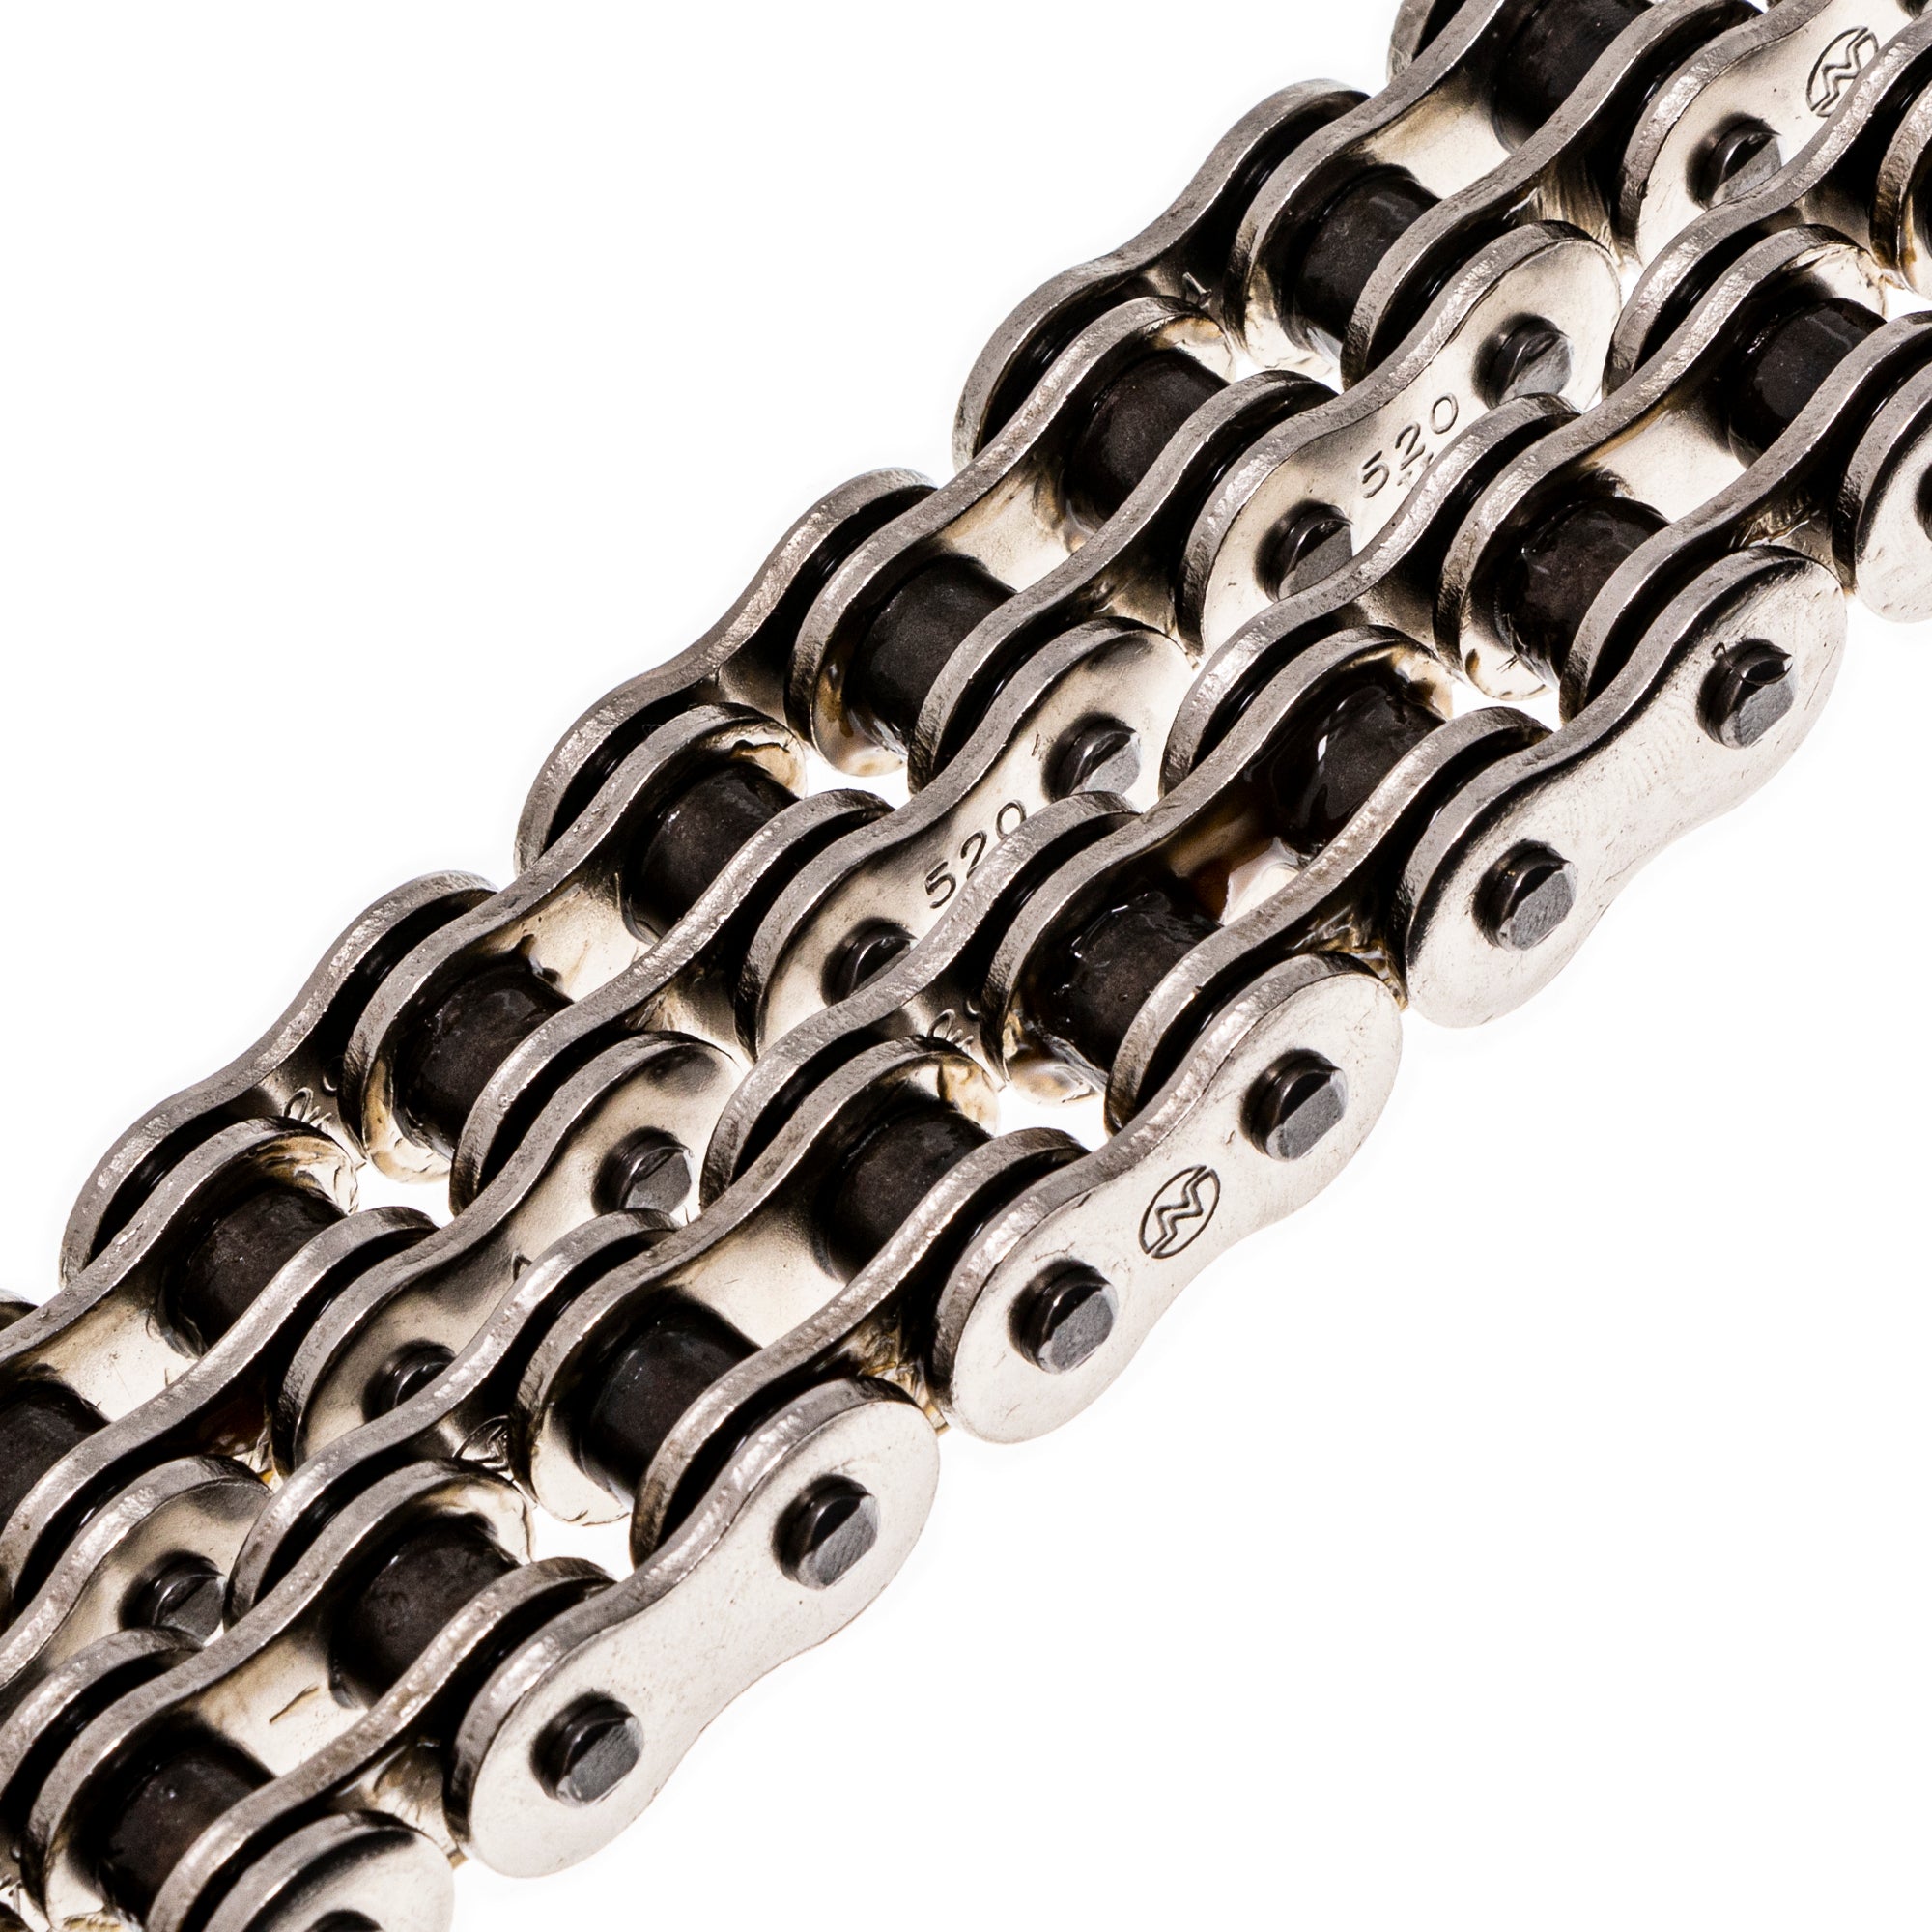 Drive Chain 68 Standard Non O-Ring w/ Master Link for zOTHER 5224 NICHE 519-CDC2335H